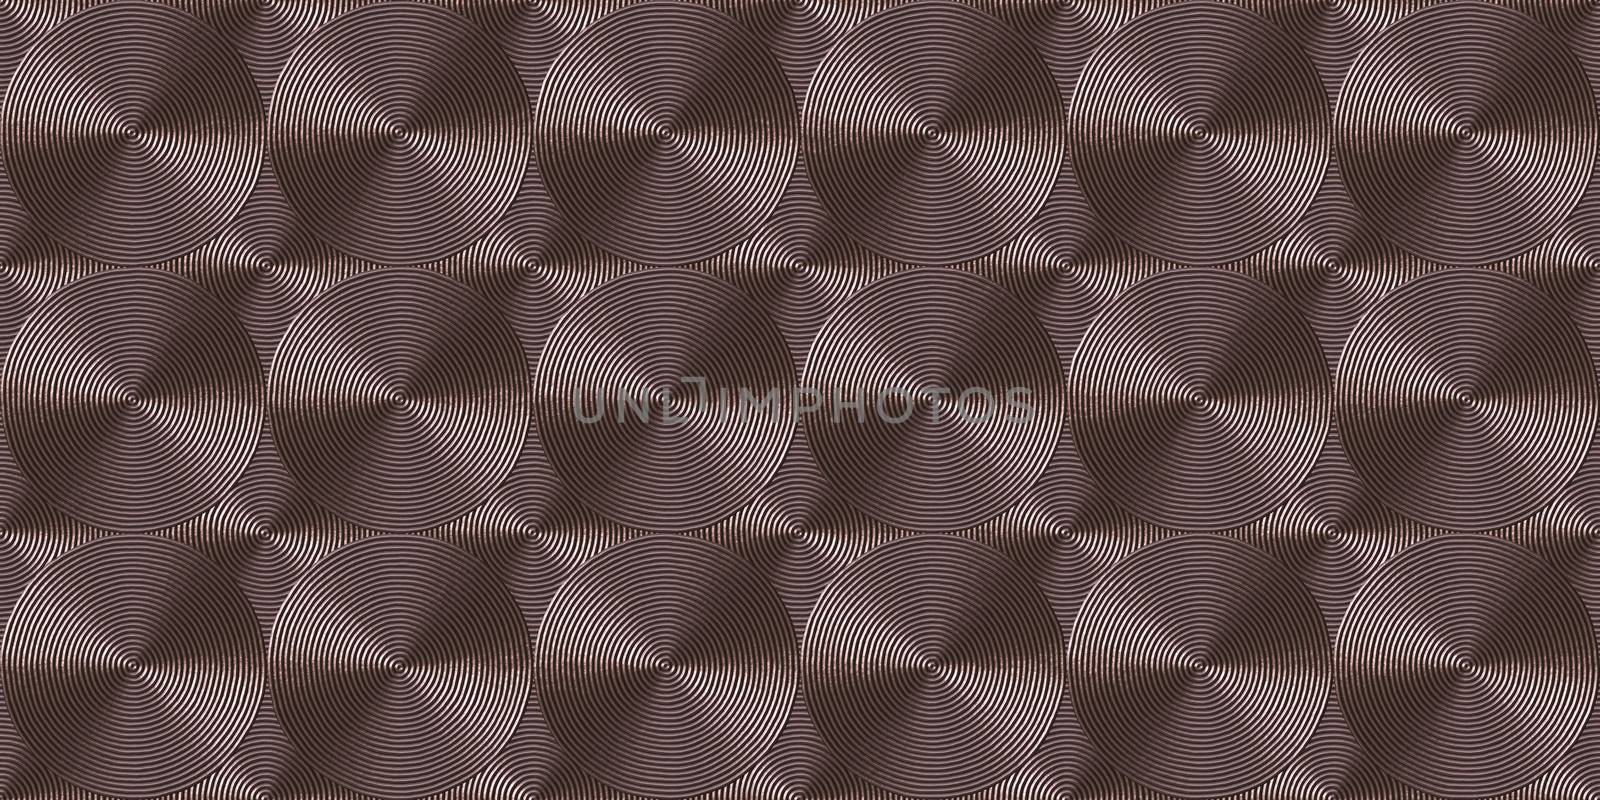 Copper art deco seamless texture. Vintage rings background. Metal circles pattern.